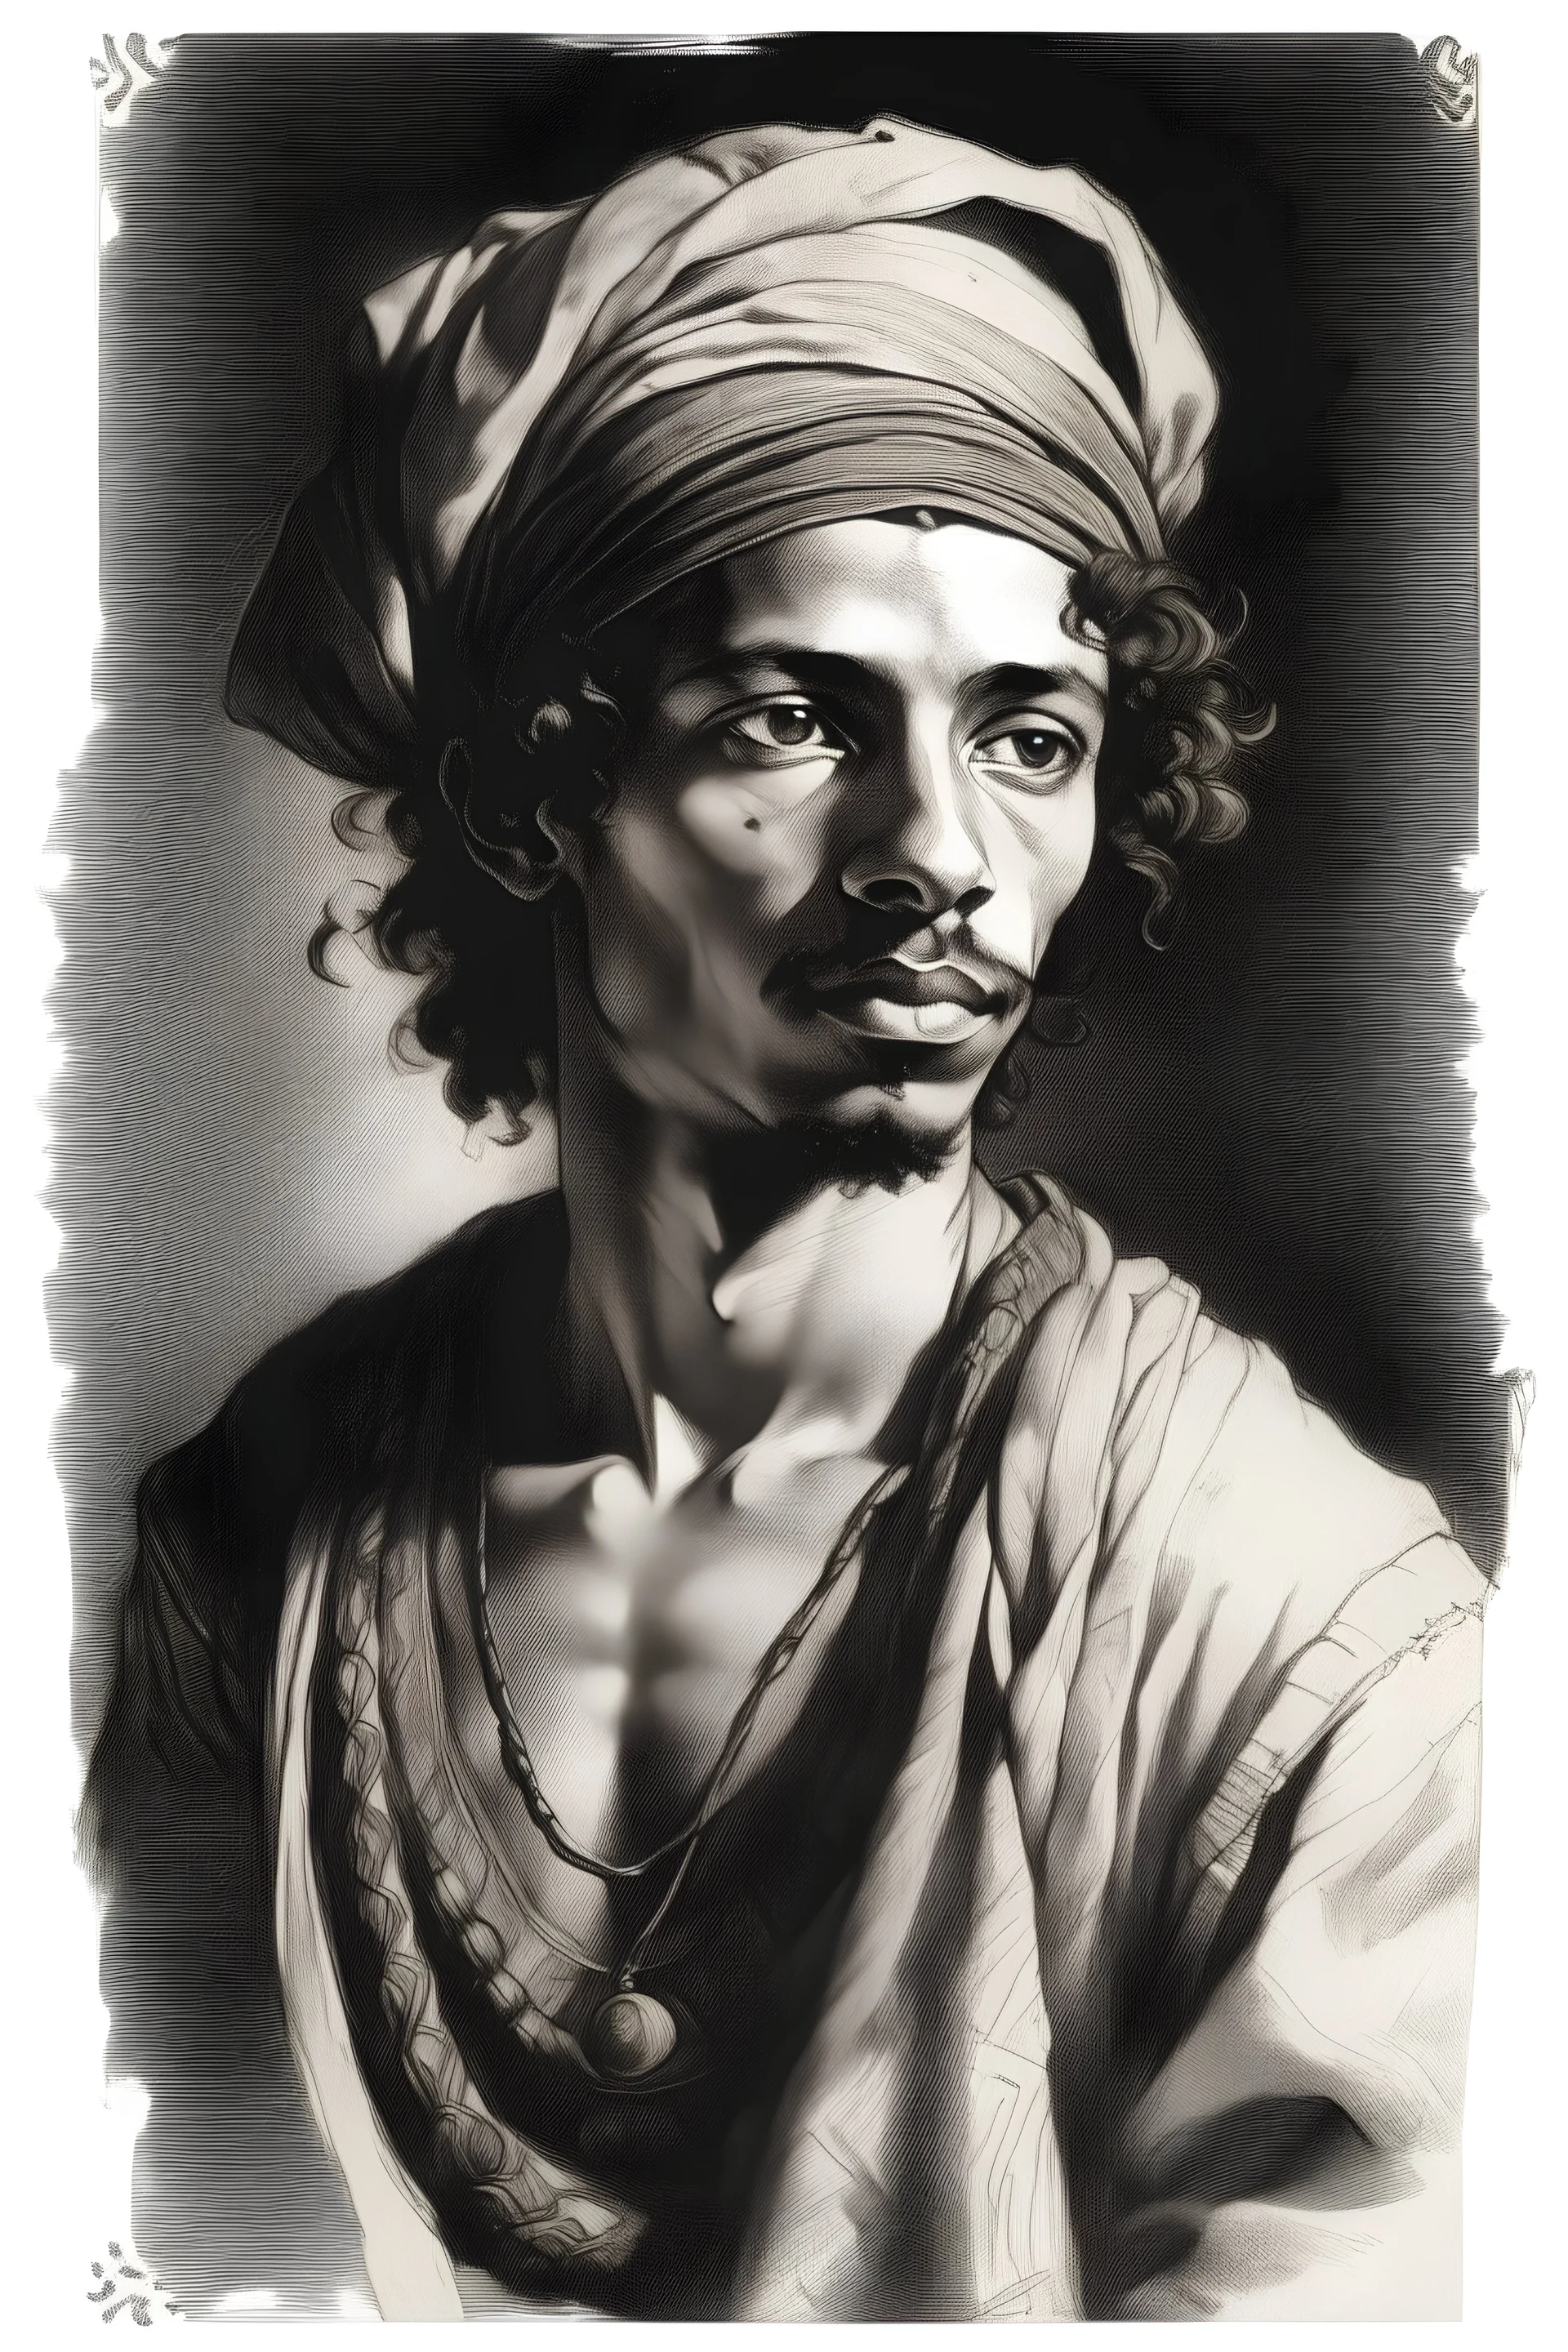 Black and white artistic painting, engraving and printing A young man from Upper Egypt works in the Ghait Rembrandt style